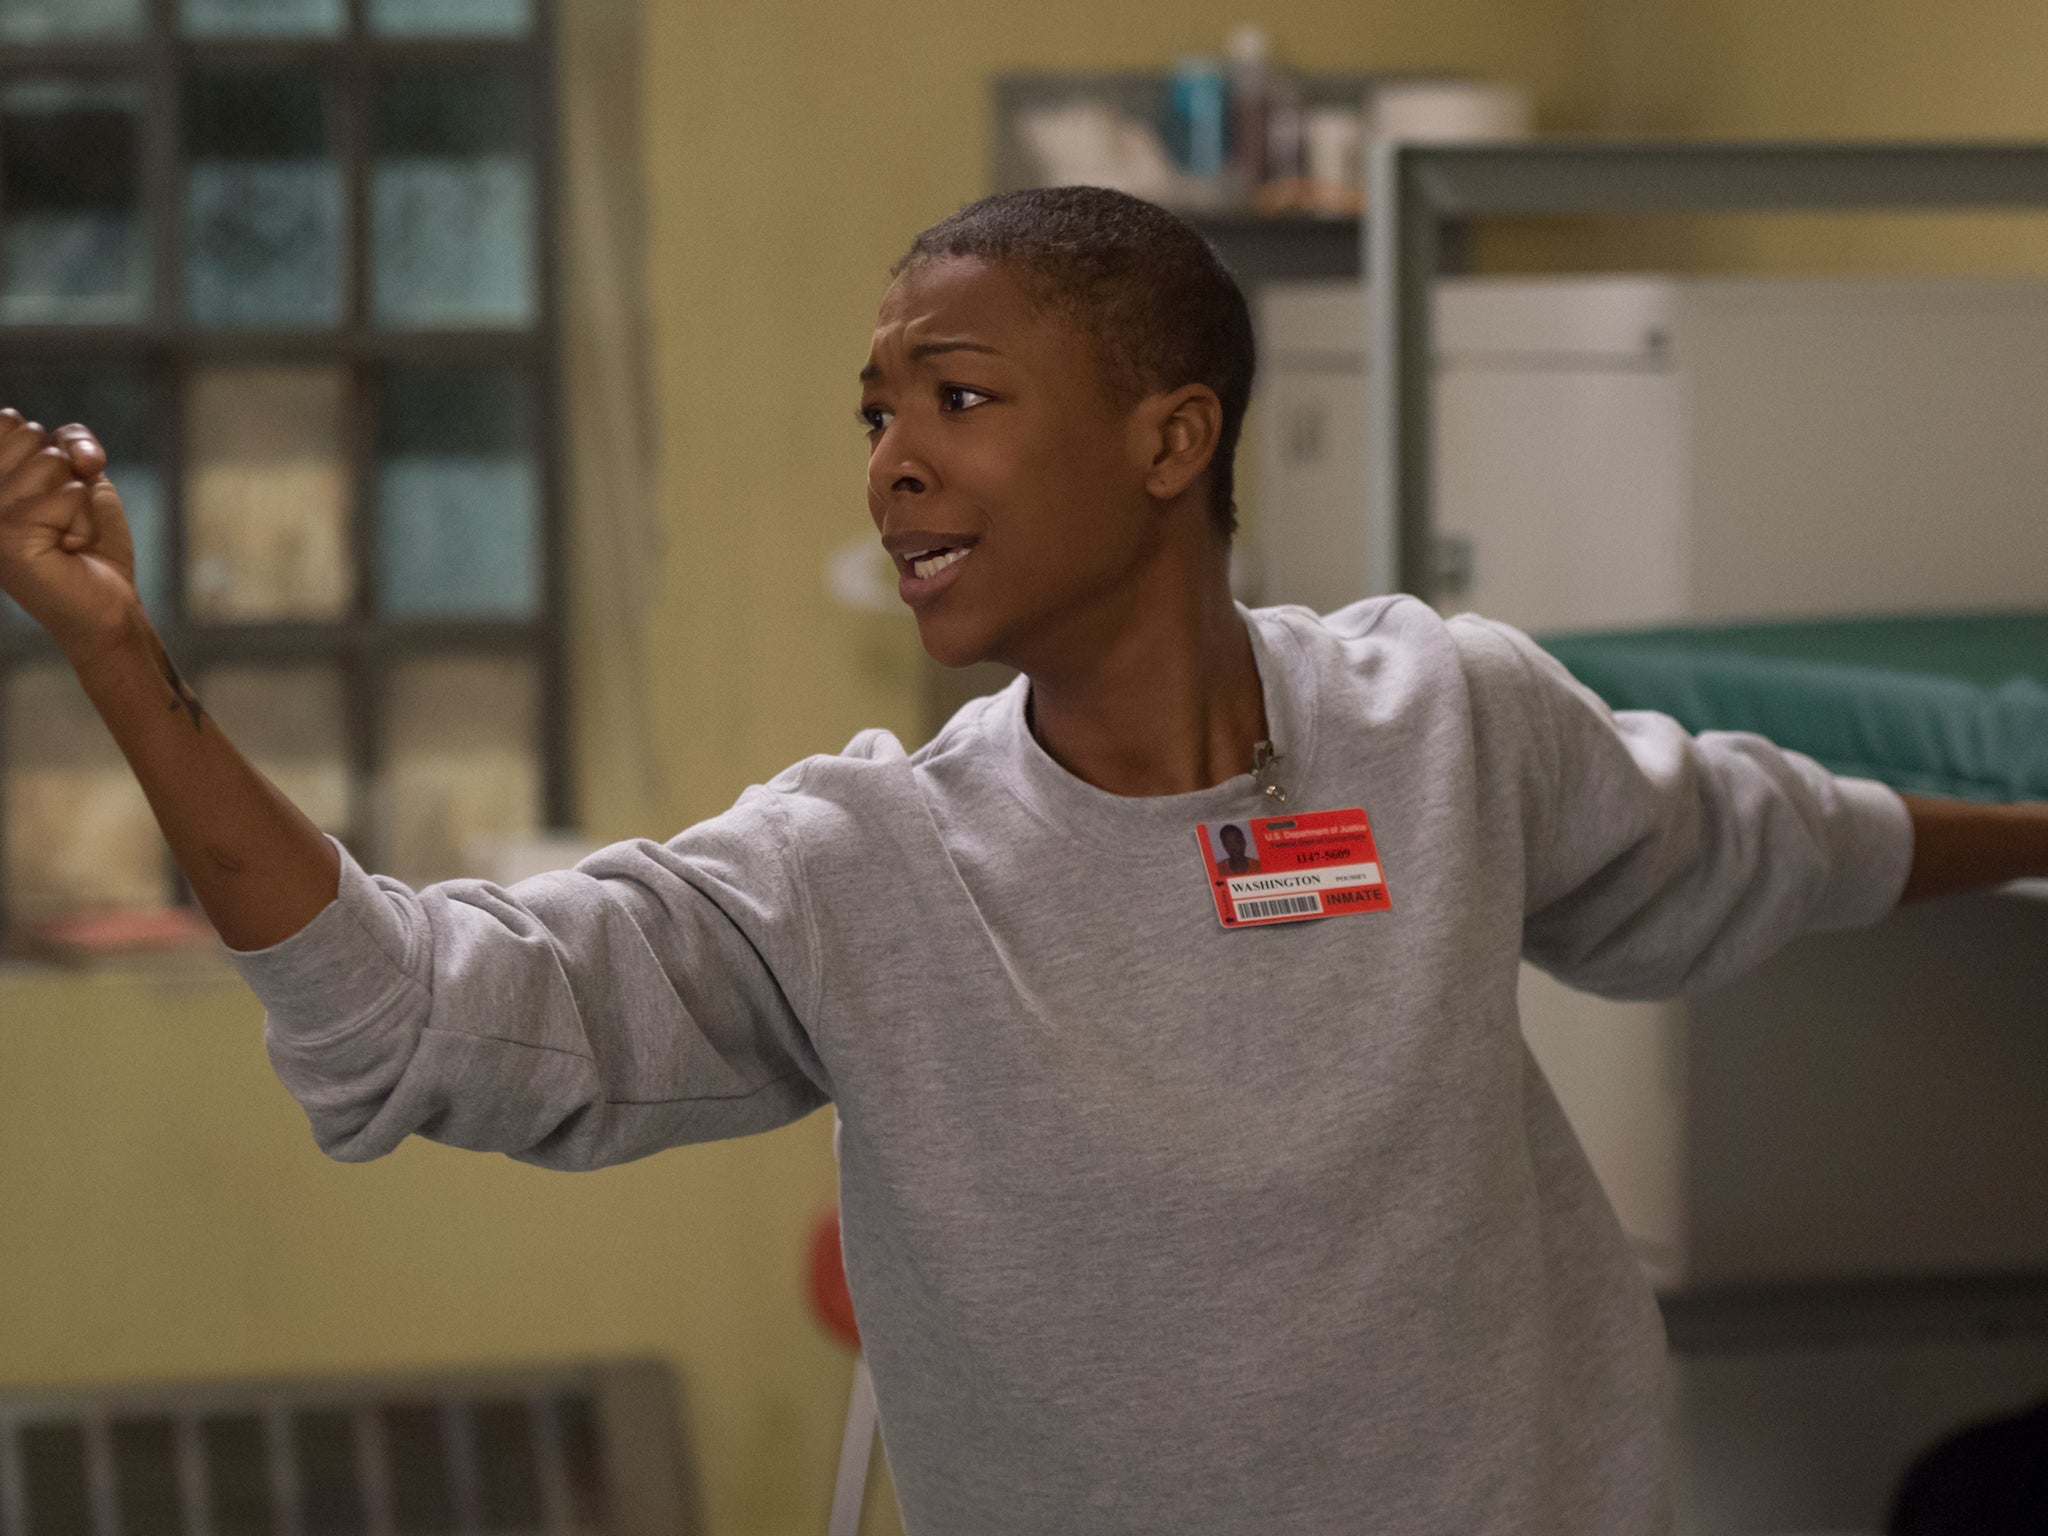 Fellow cast members were outraged to hear Poussey was being written off